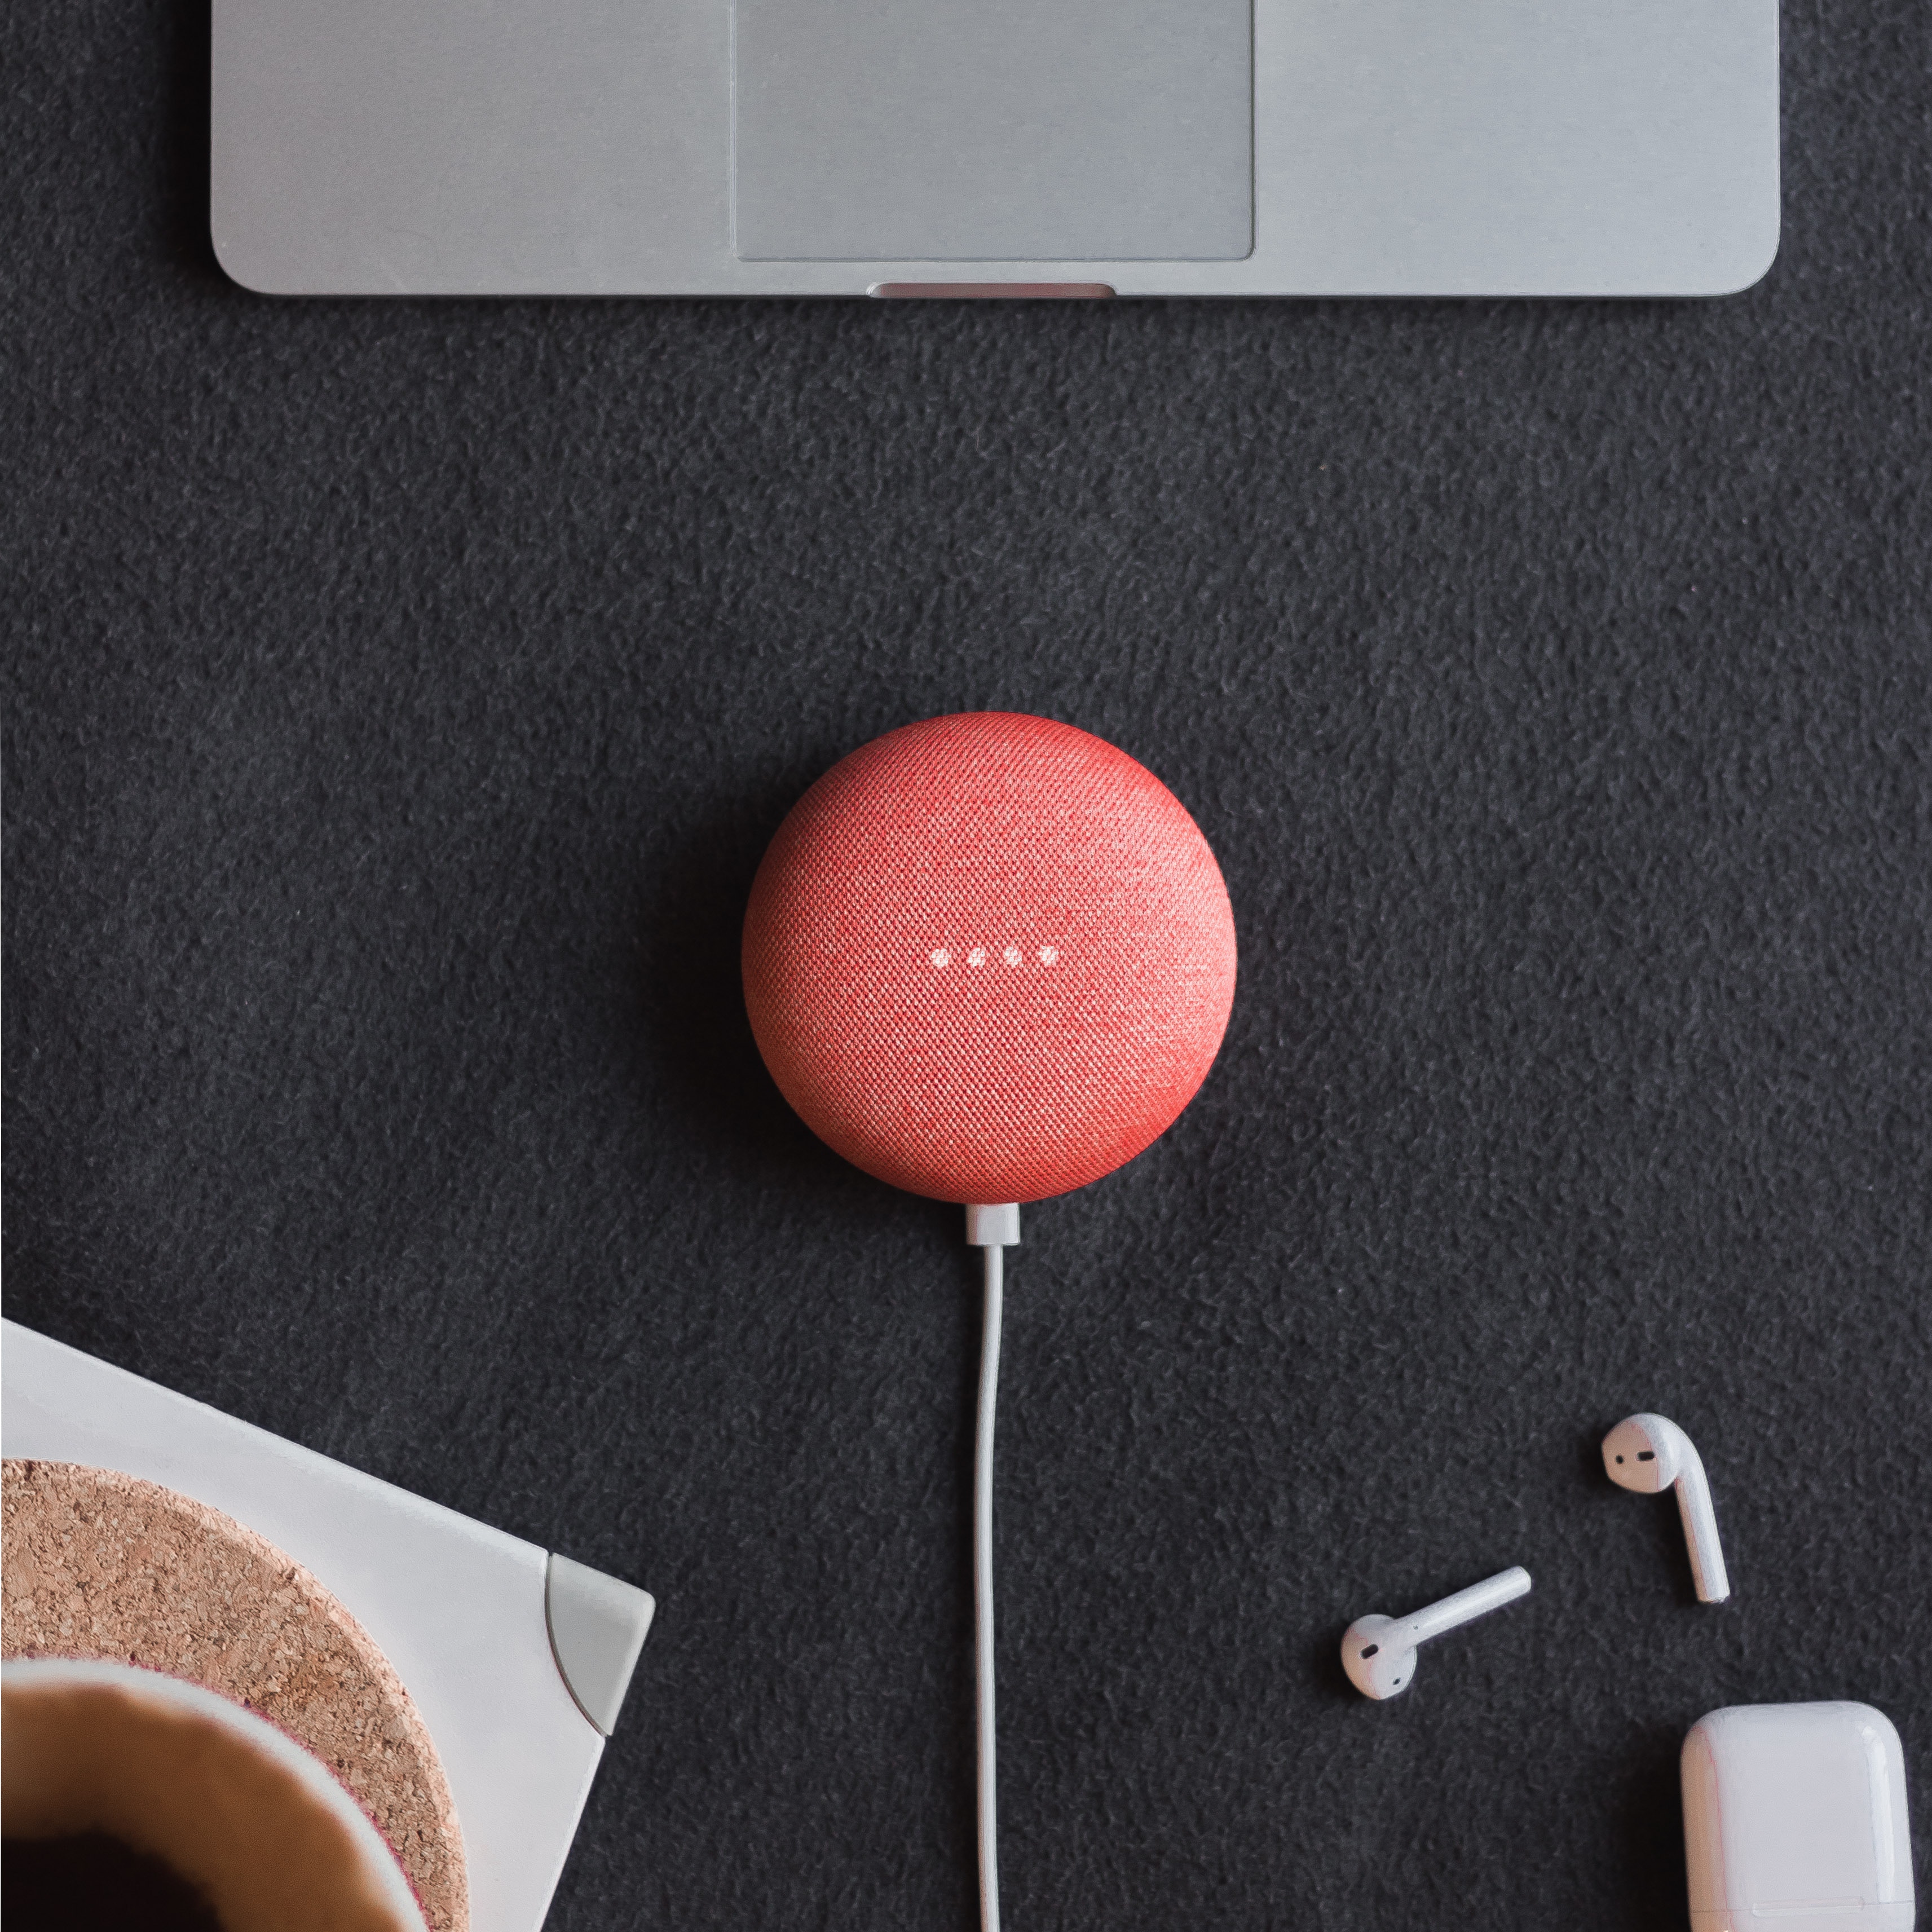 A red Google Home Mini surrounded by a pair of Apple AirPods and a MacBook.